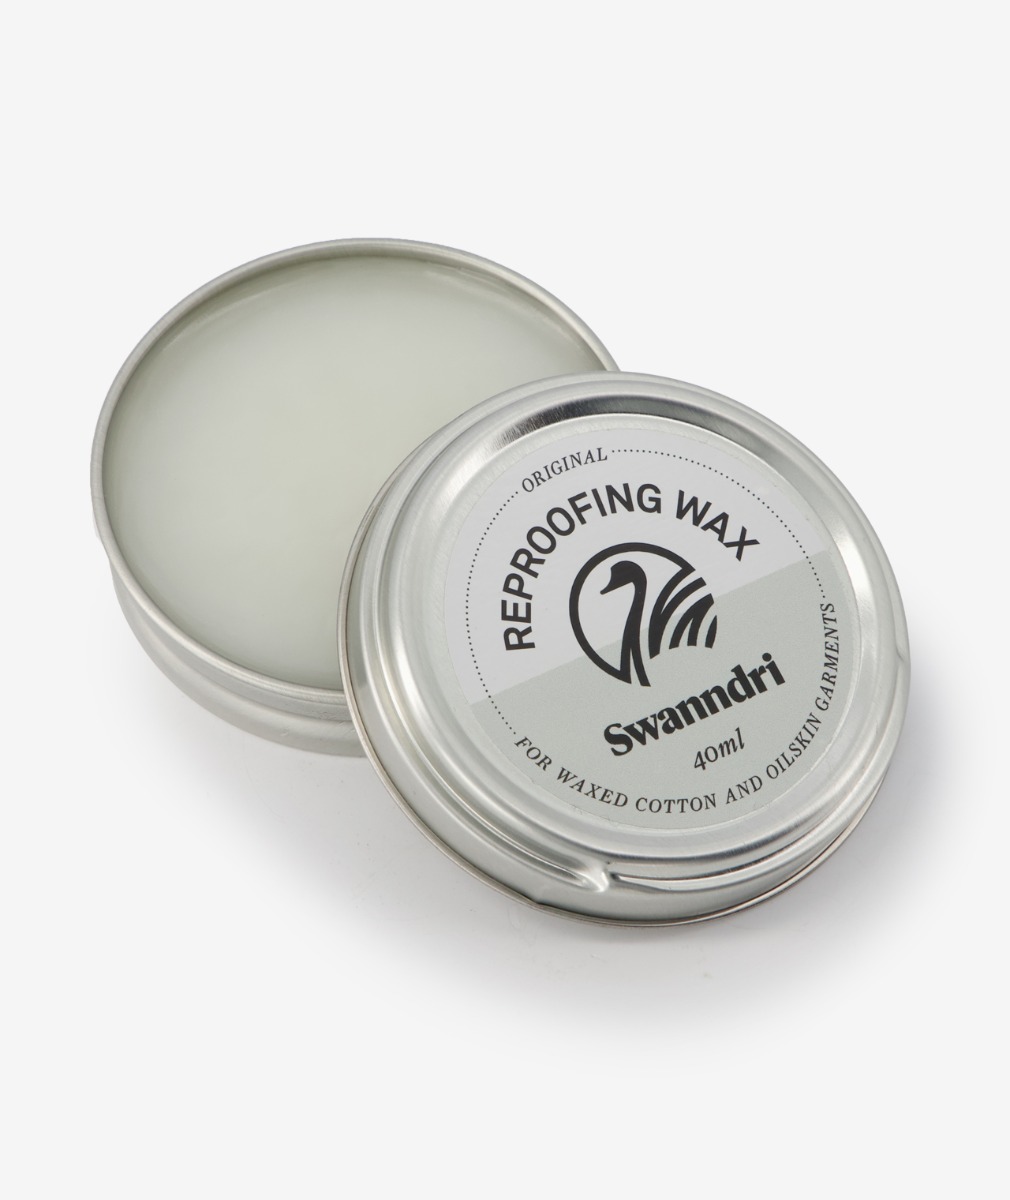 Wax Tin for Re-proofing Oilskin Vests and Jackets